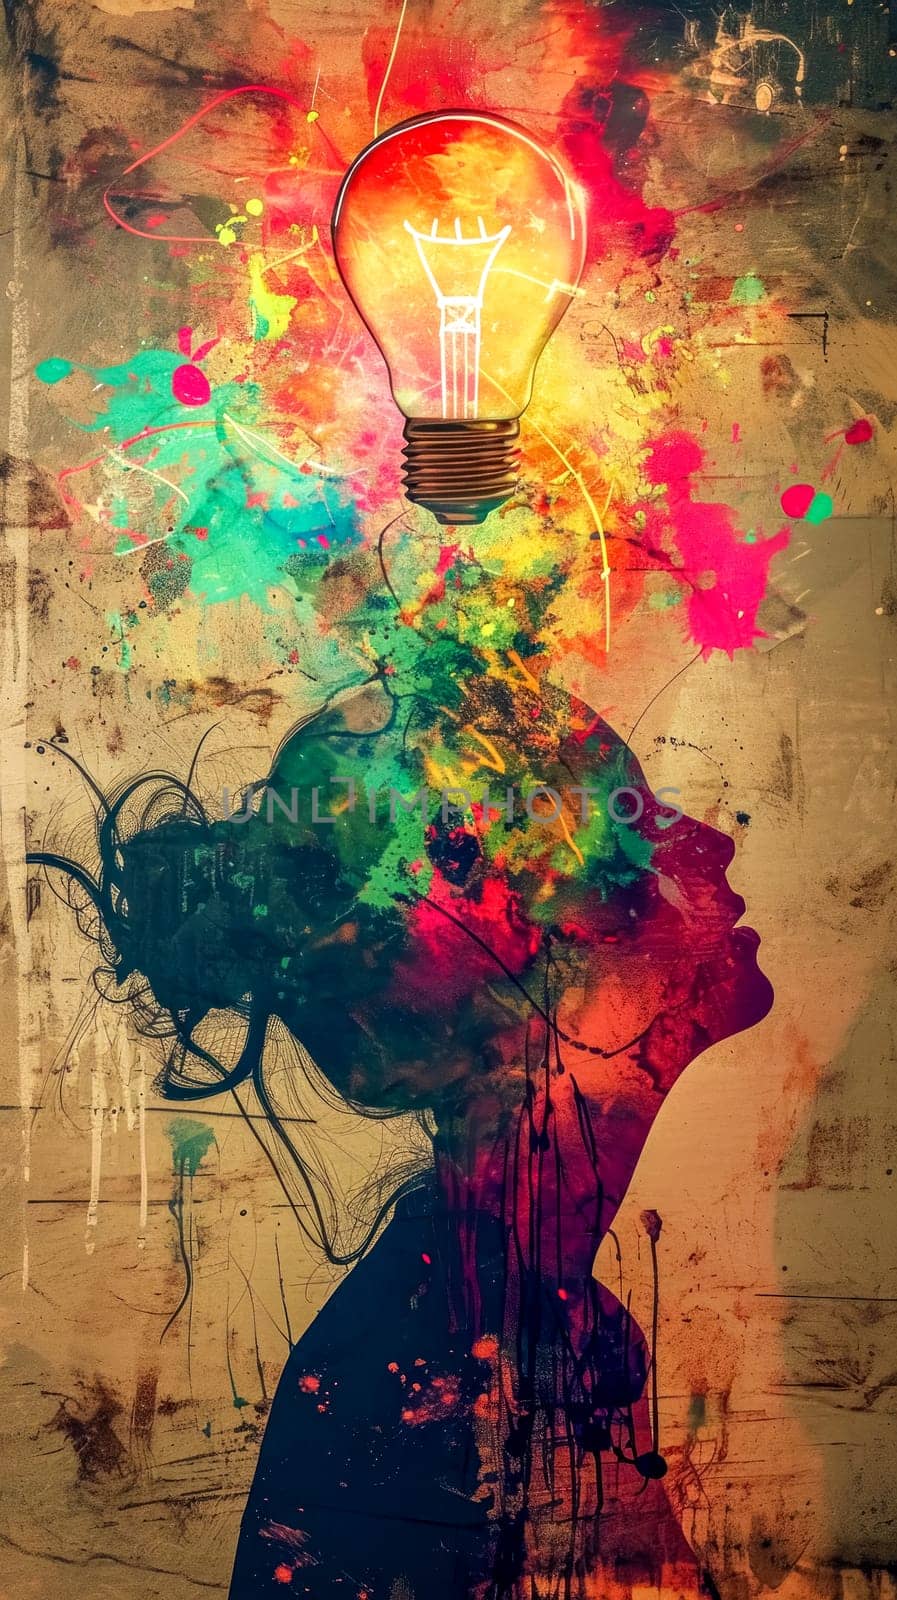 artistic silhouette of a human head with a bright lightbulb symbolizing an idea, surrounded by a splatter of vivid colors on a textured background, depicting innovation and creativity. by Edophoto